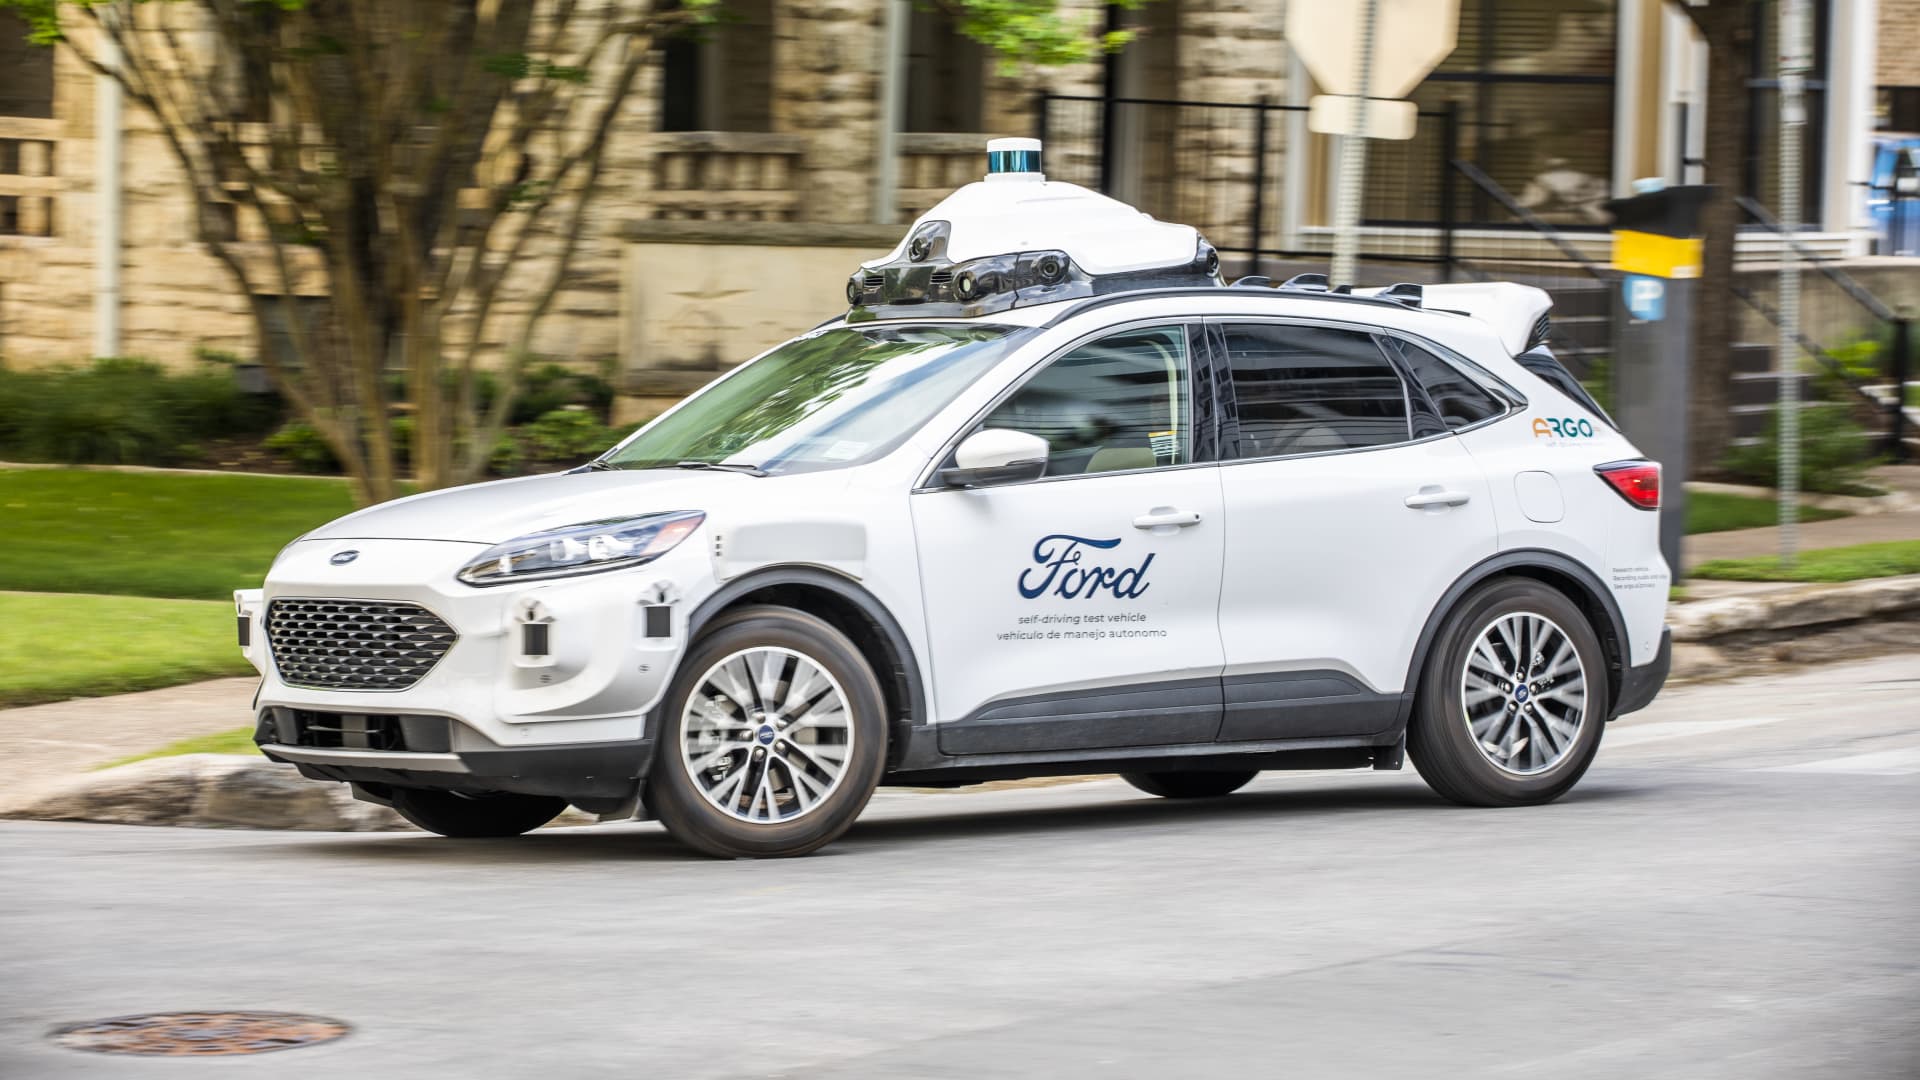 How Ford and VW’s multibillion-dollar self-driving car project failed